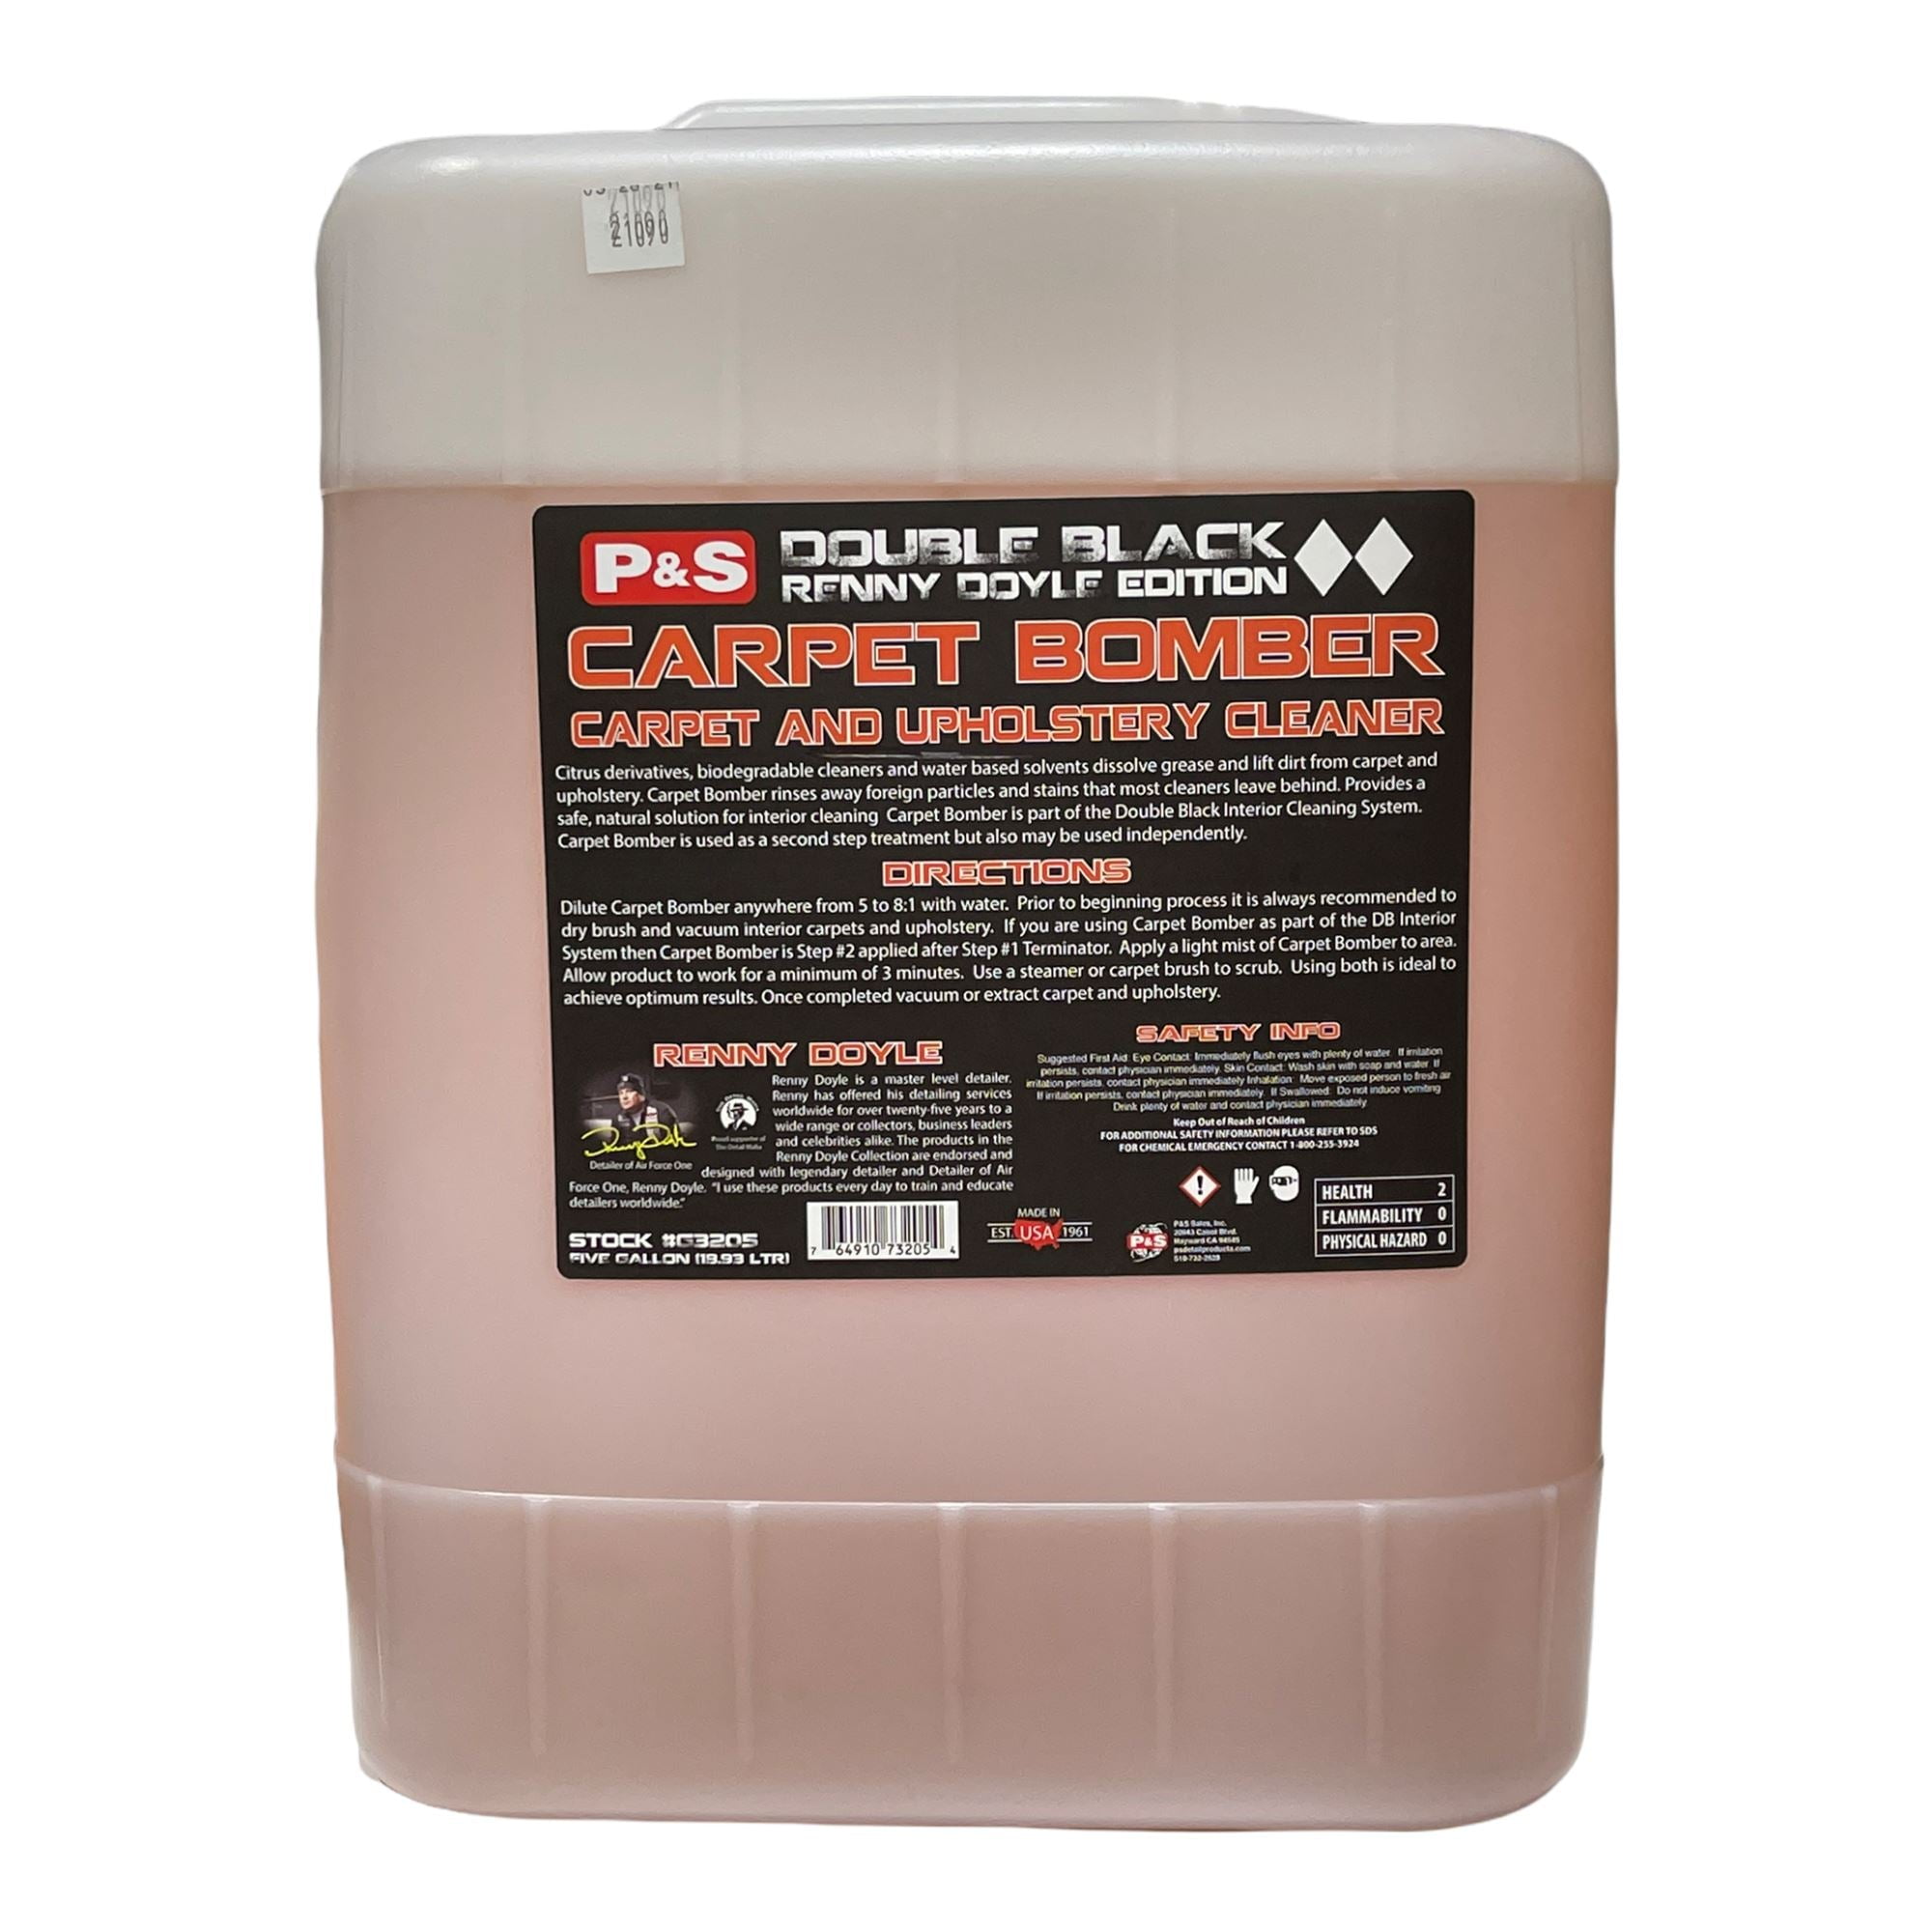 P&S Professional Detail Products - Carpet Bomber - Carpet and